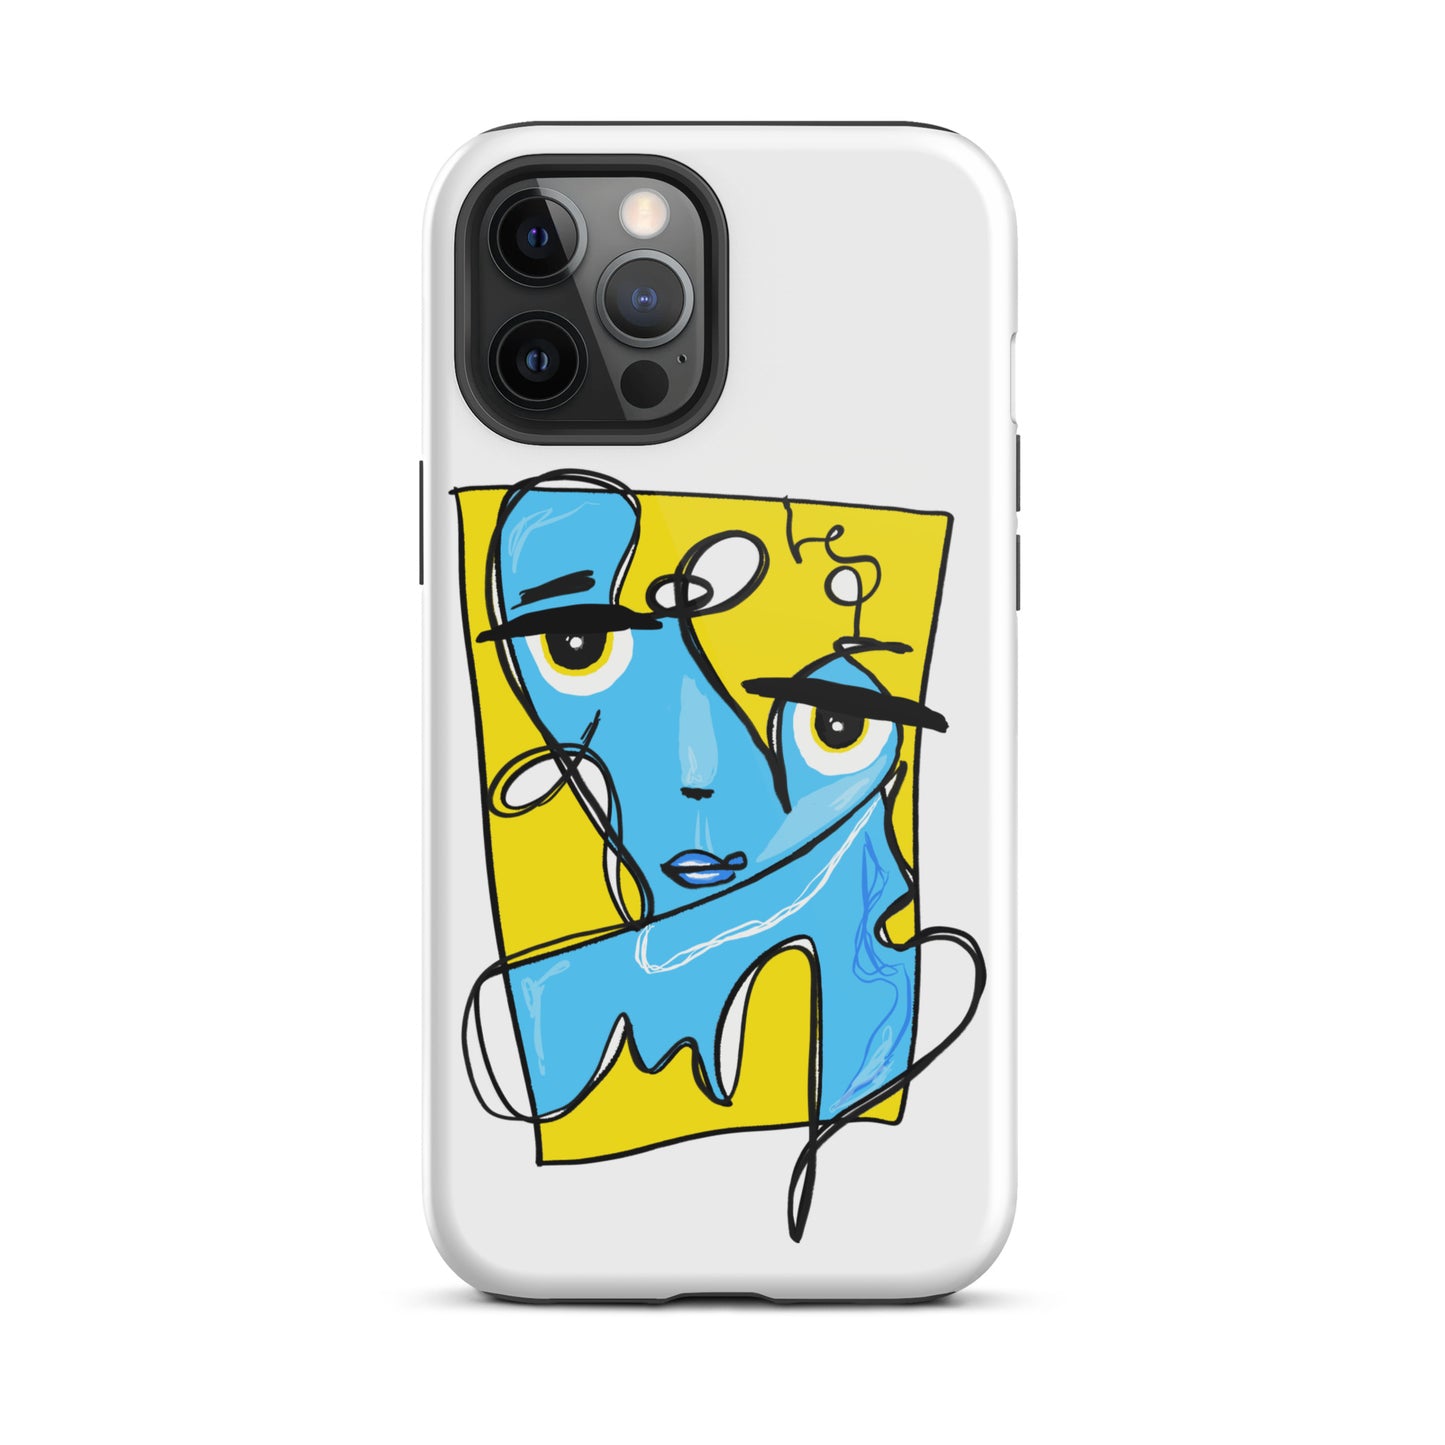 Stylish blue and yellow iPhone case